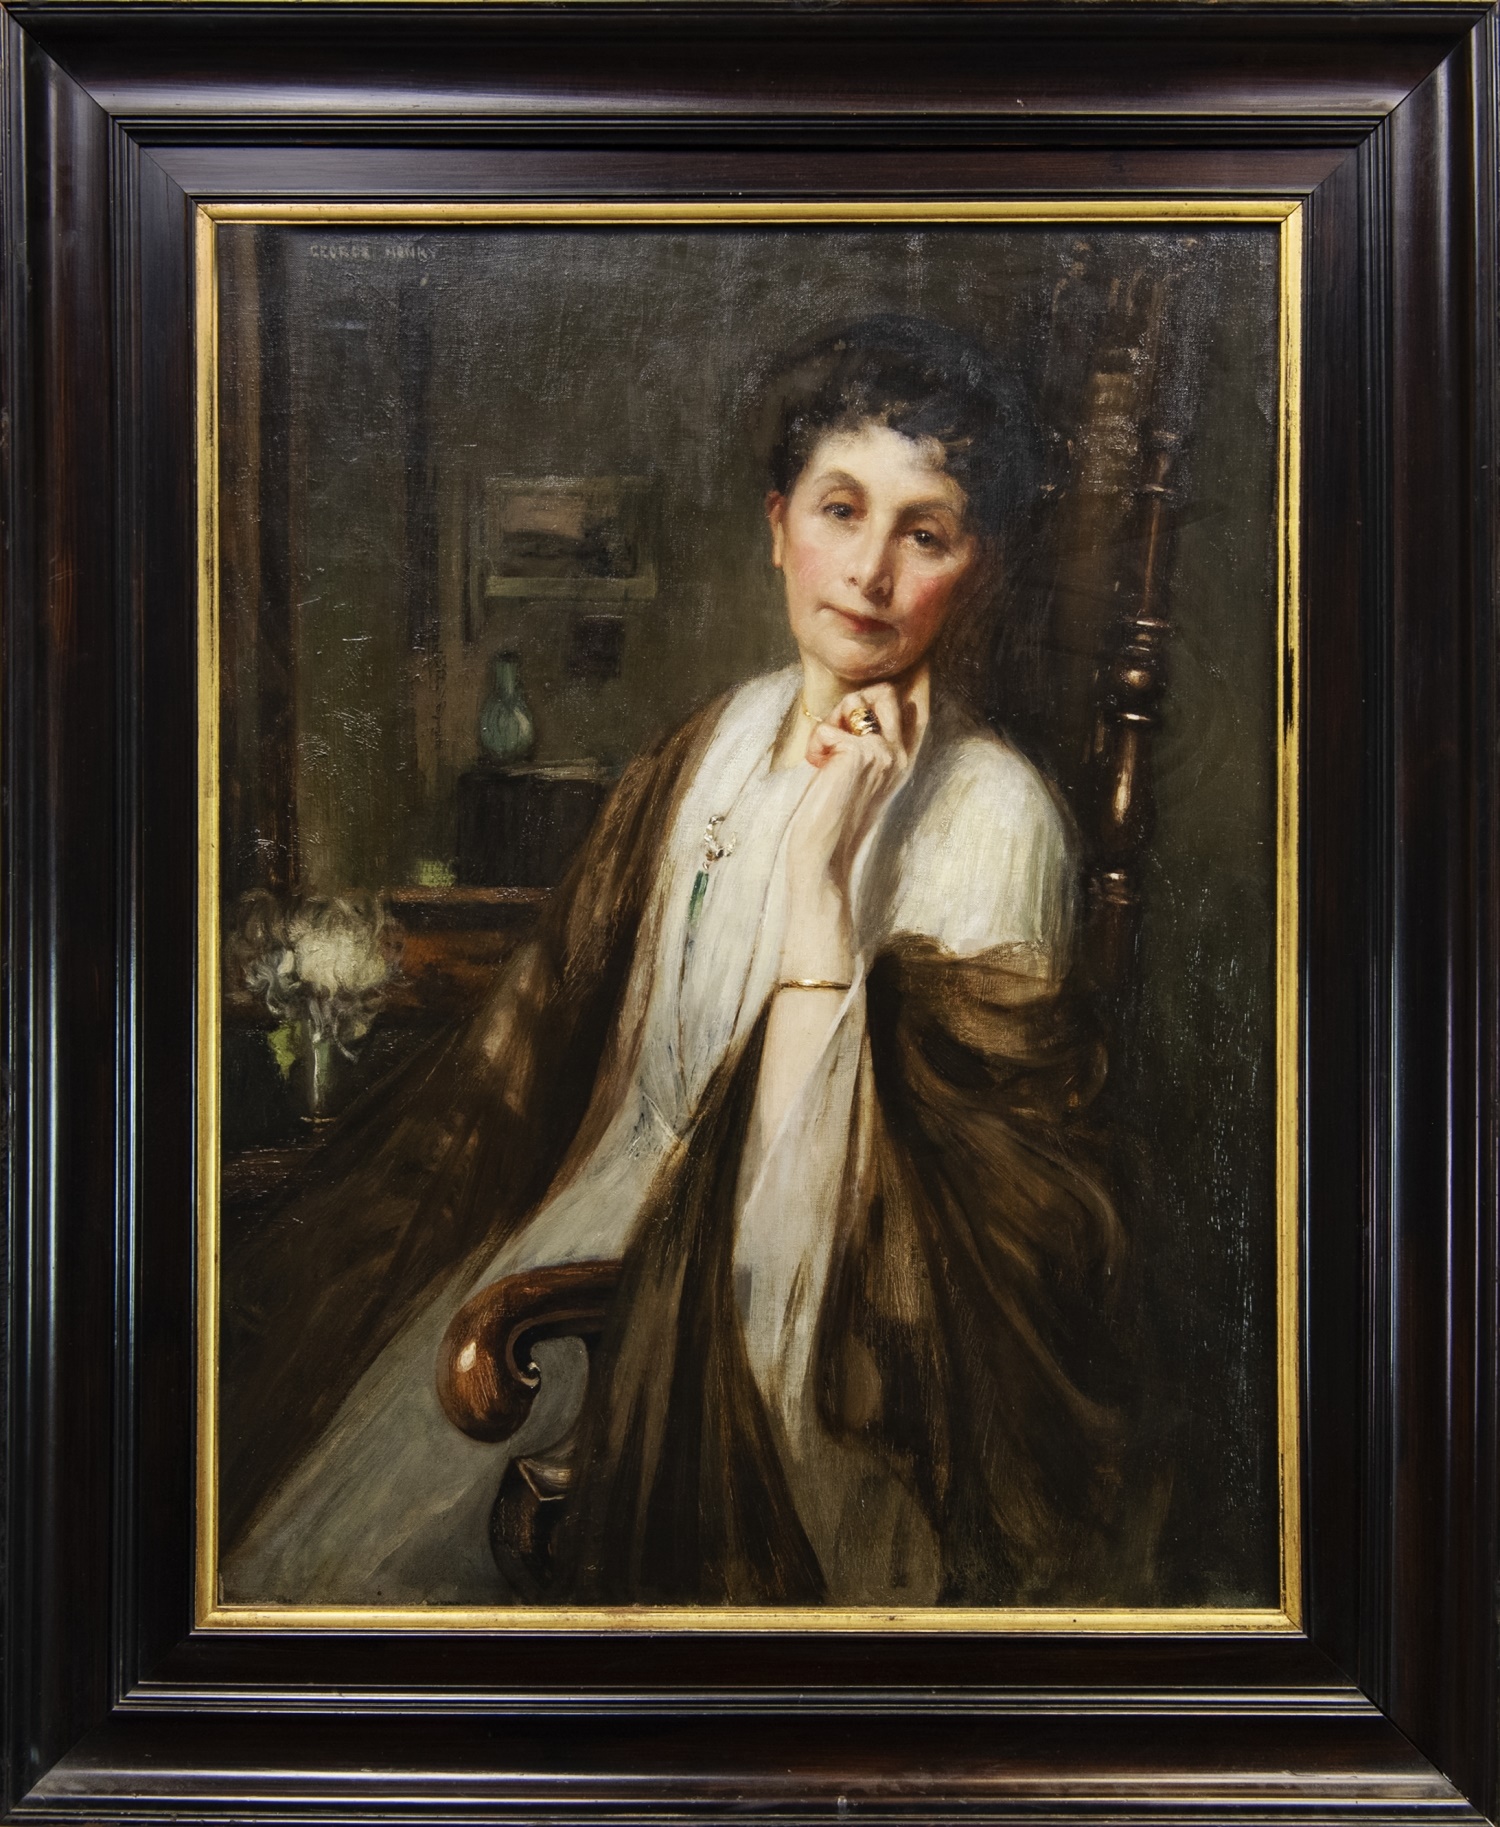 A LADY OF MEANS, AN OIL BY GEORGE HENRY